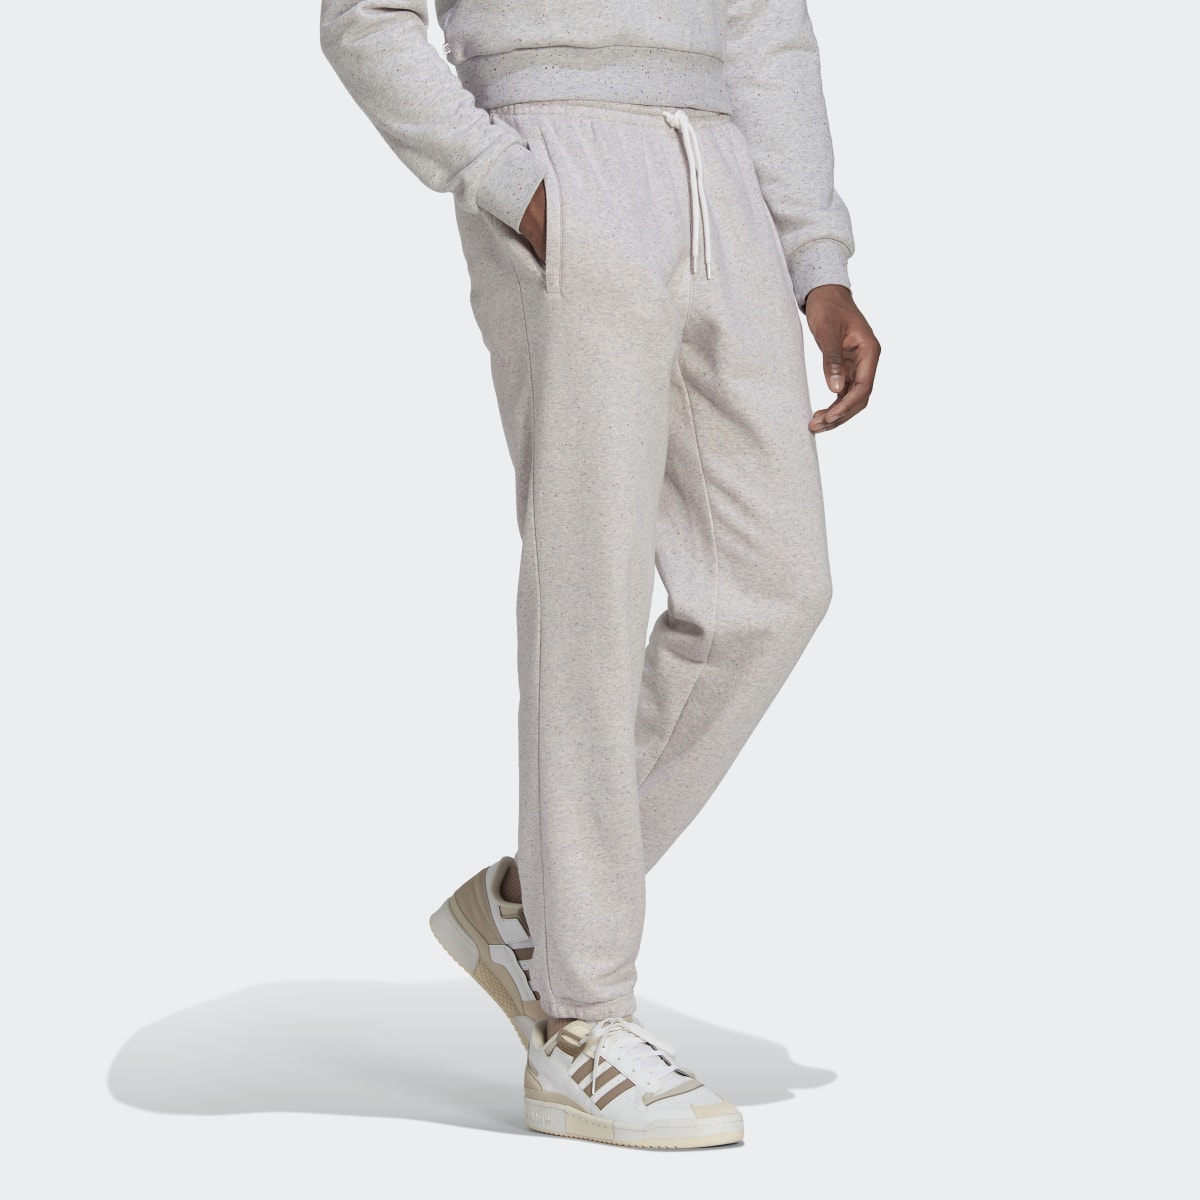 Adidas Essentials+ Made with Nature Sweat Pants. 4